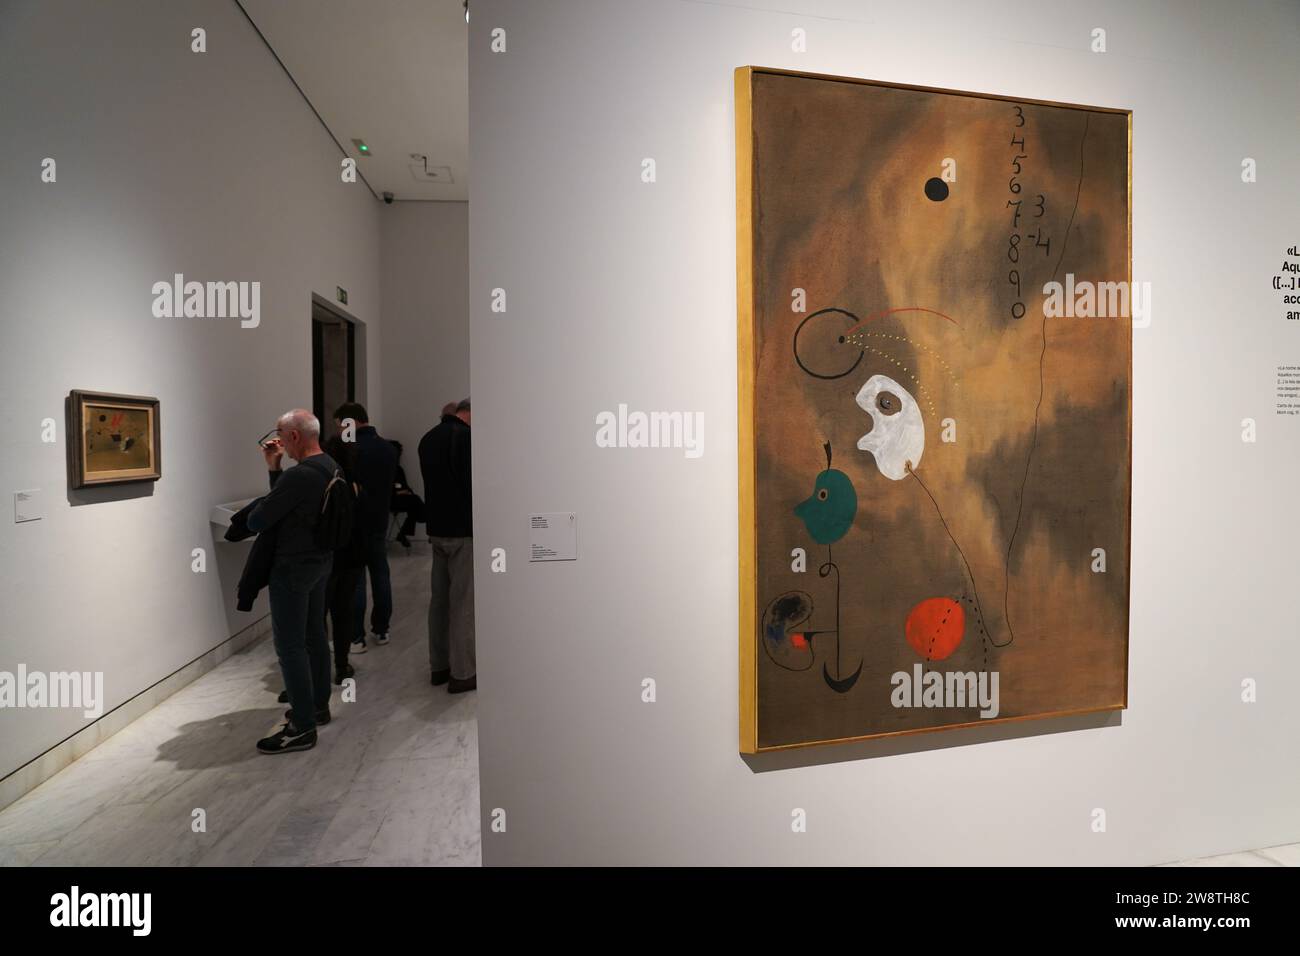 Joan Miro, Painting - Pablo Picasso Museum in Barcelona, Spain Stock Photo